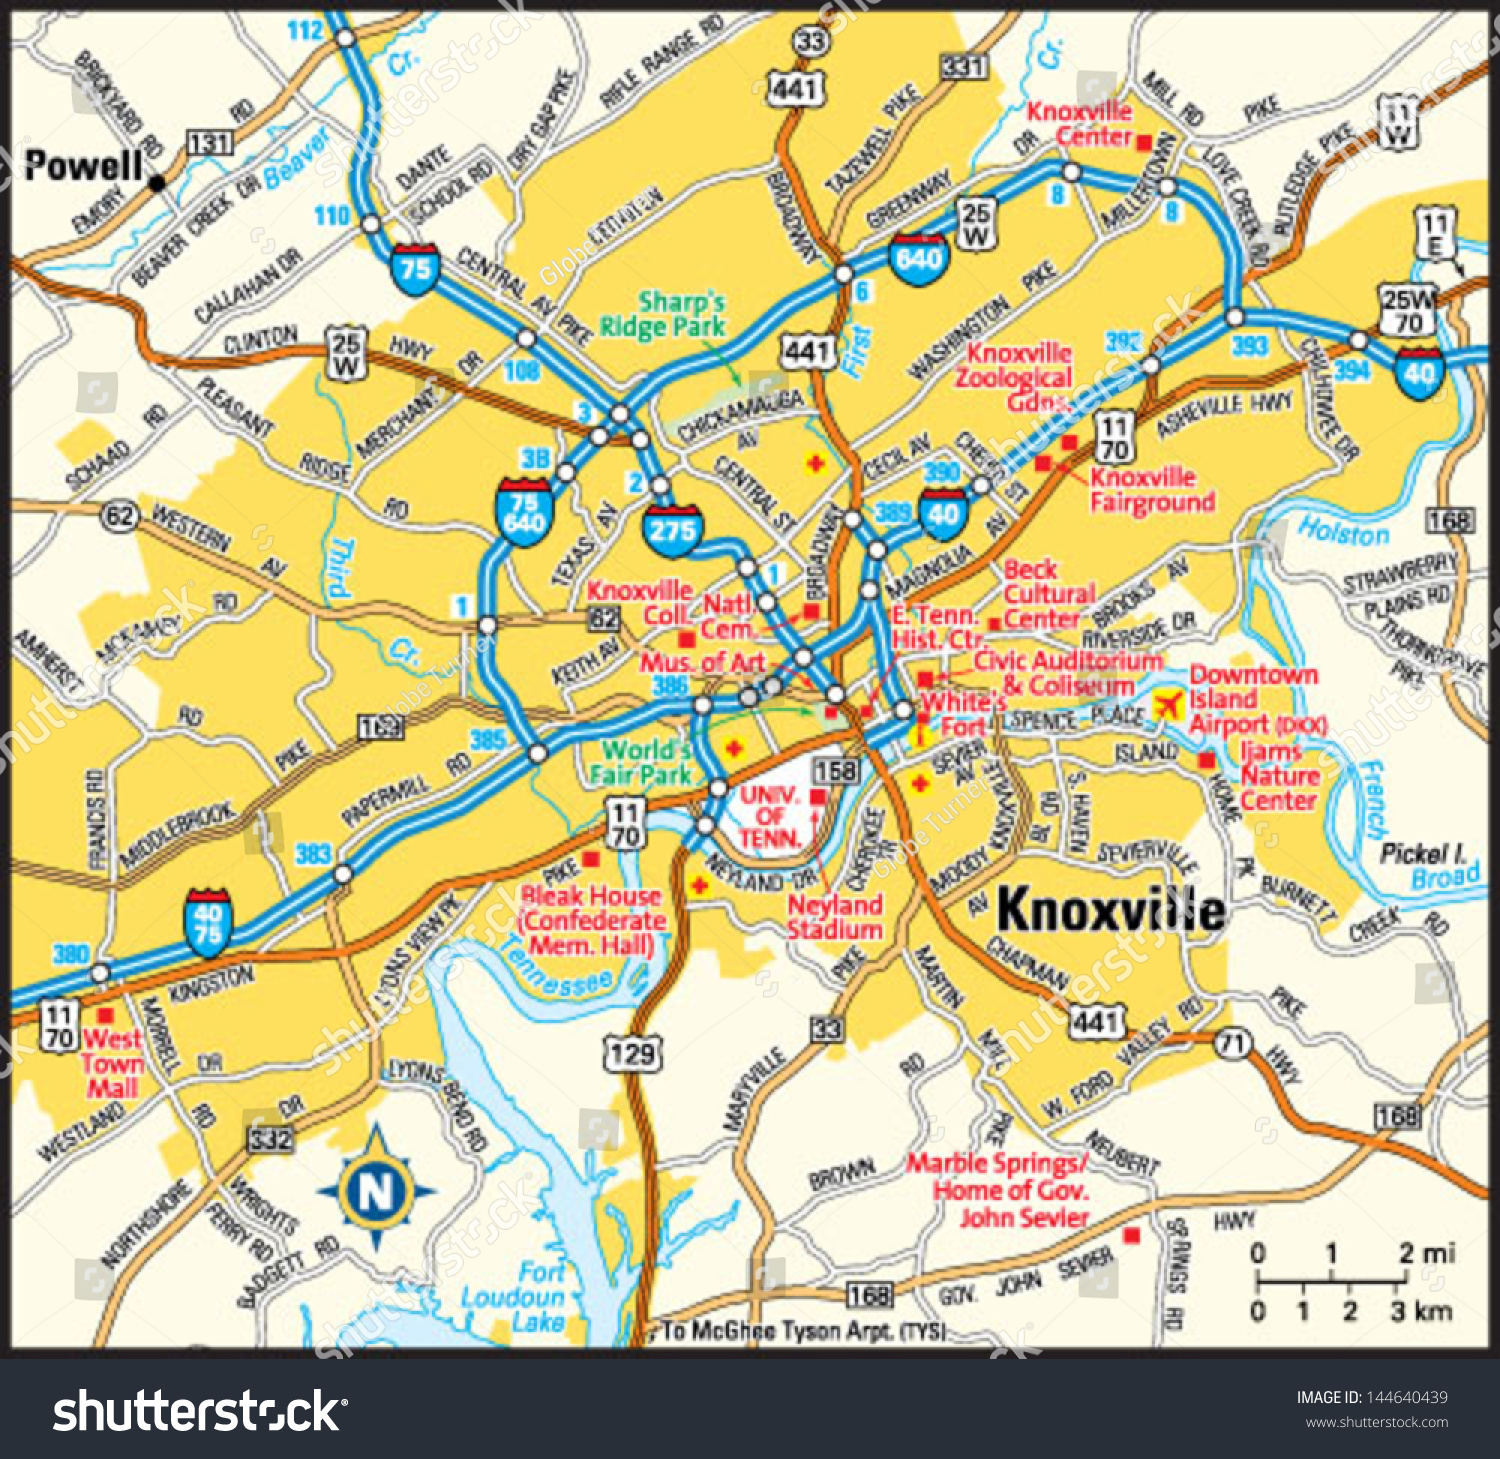 map of knoxville tn and surrounding cities Knoxville Tennessee Area Map Stock Vector Royalty Free 144640439 map of knoxville tn and surrounding cities